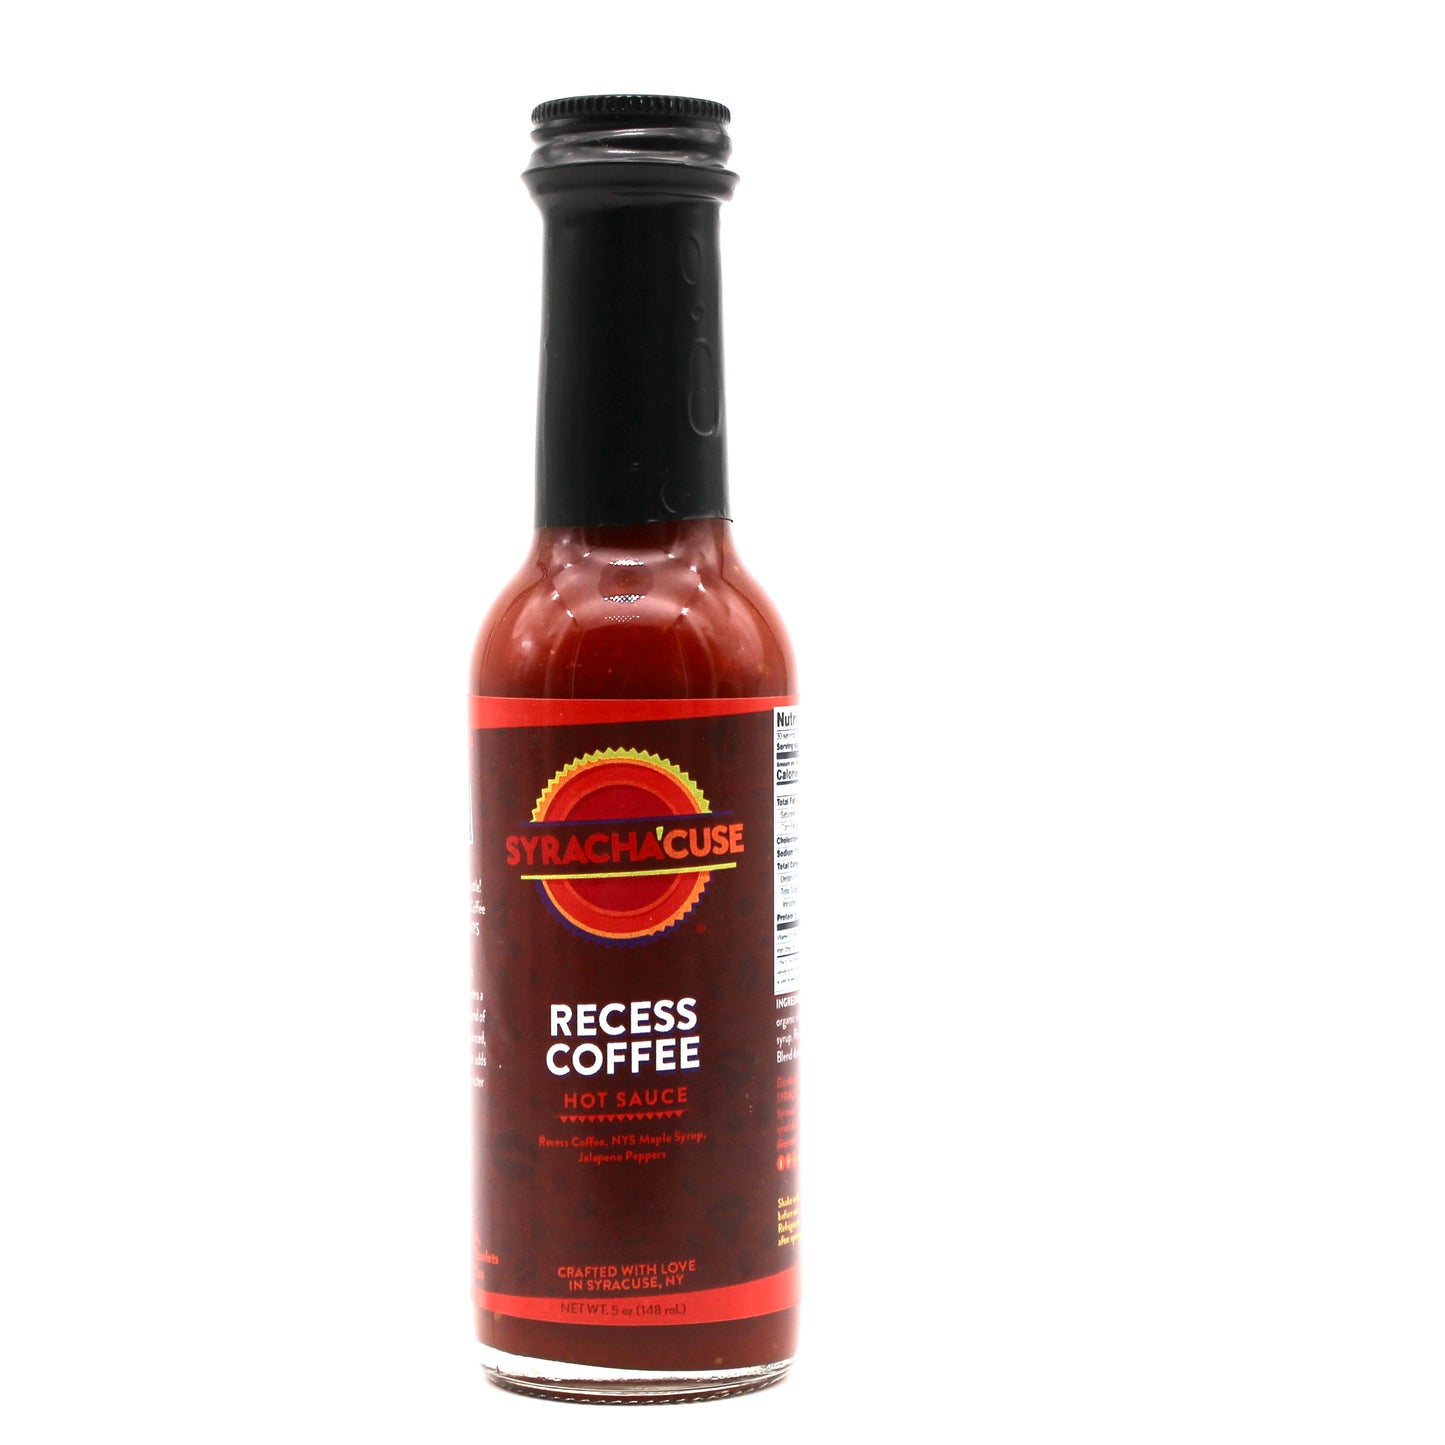 RECESS COFFEE HOT SAUCE, wake up call in a bottle made with Recess Coffee, Syracuse, NY